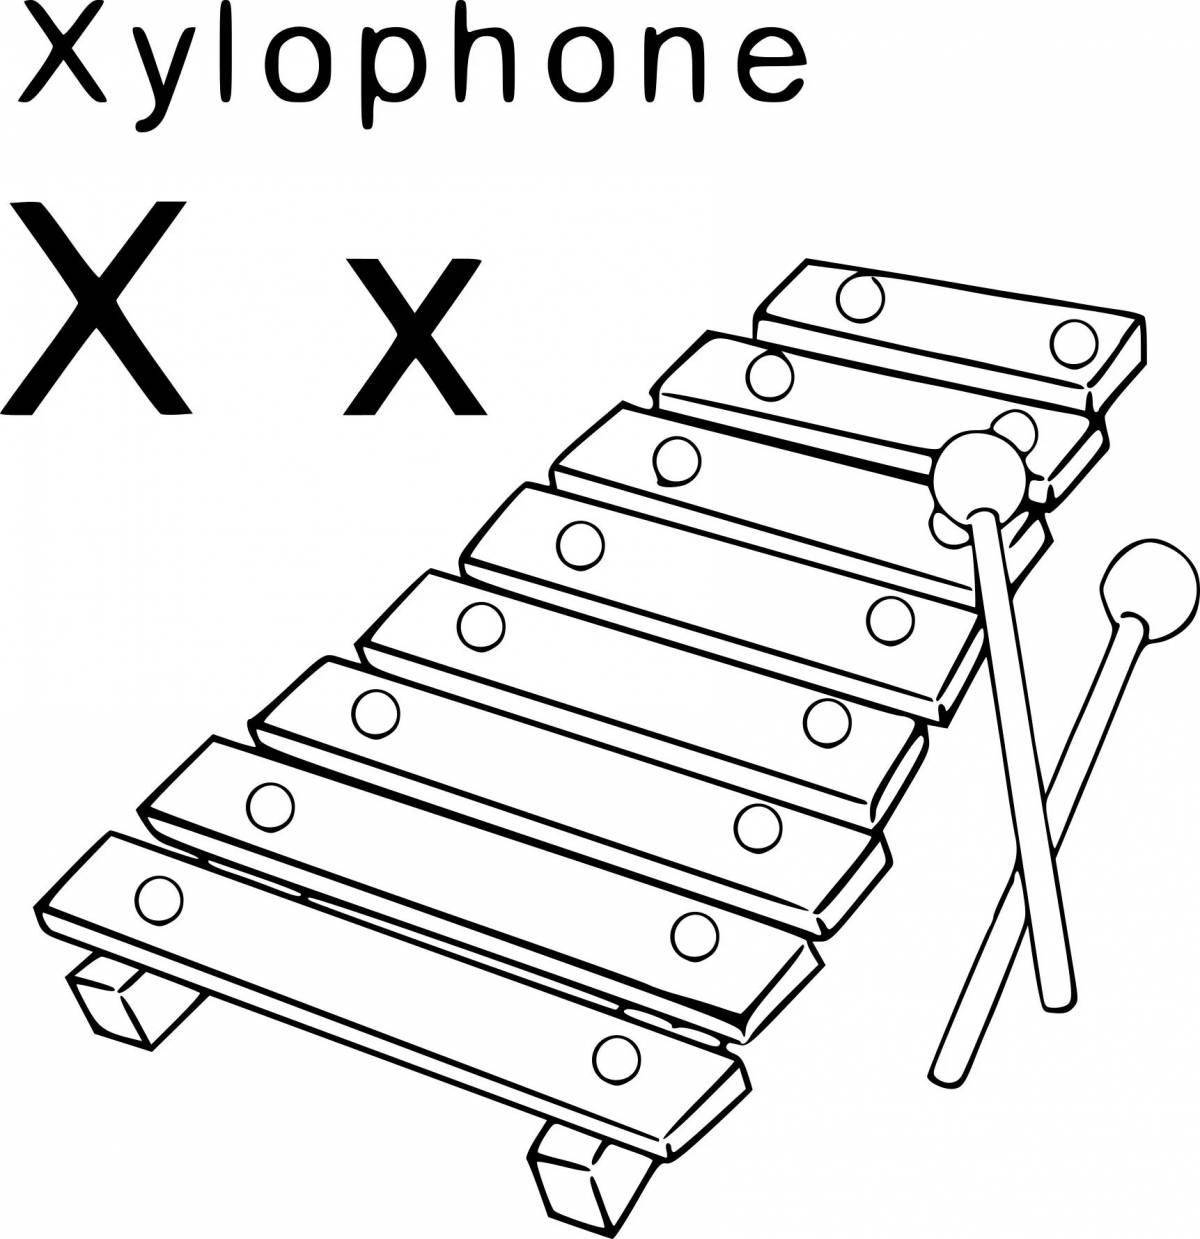 Xylophone glitter coloring book for little ones